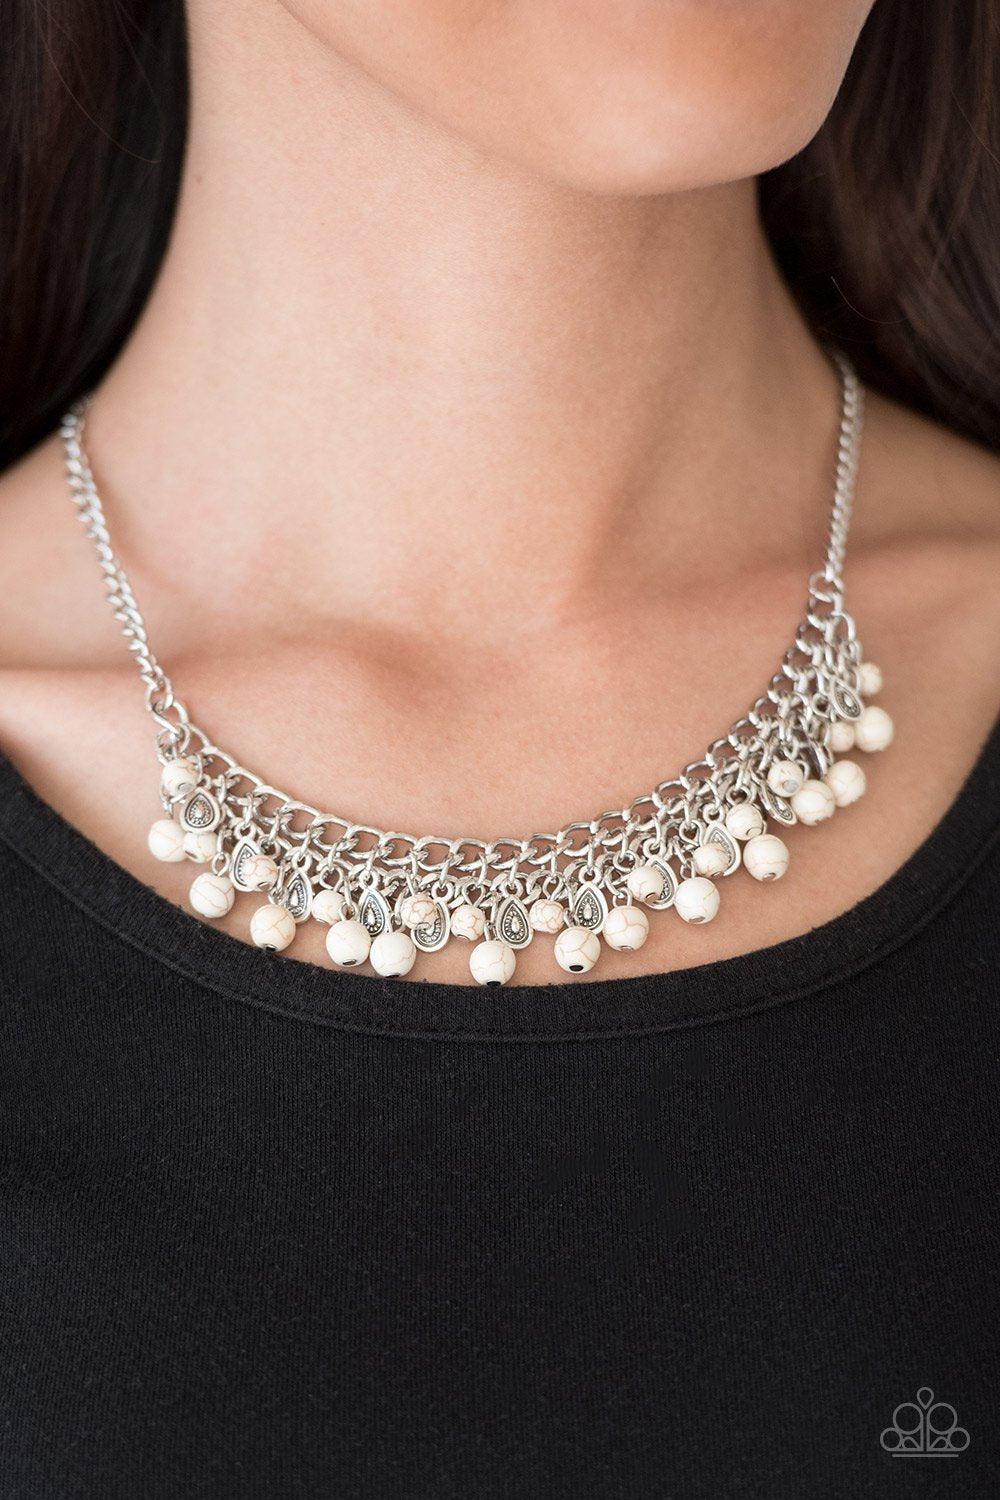 Poshly Paleo White Stone and Silver Necklace - Paparazzi Accessories - model -CarasShop.com - $5 Jewelry by Cara Jewels